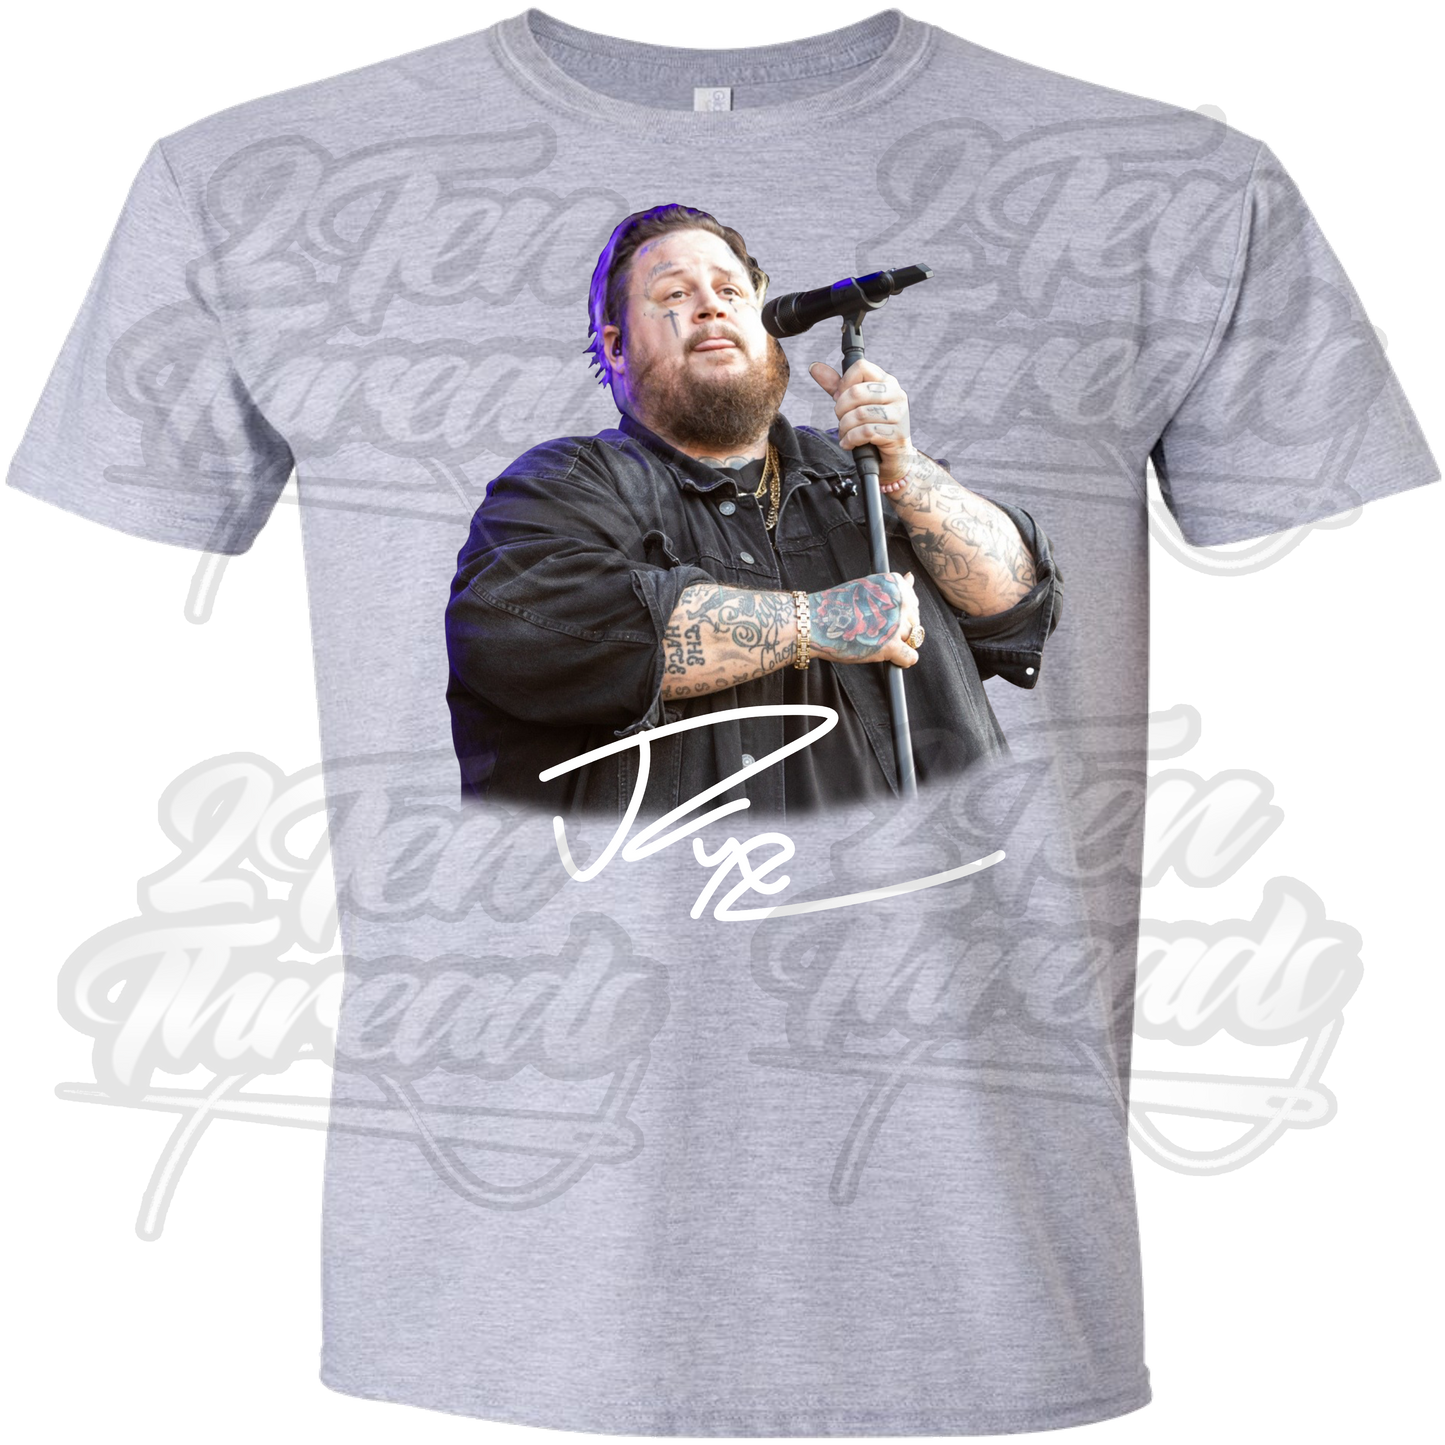 Signed Jelly Roll Shirt